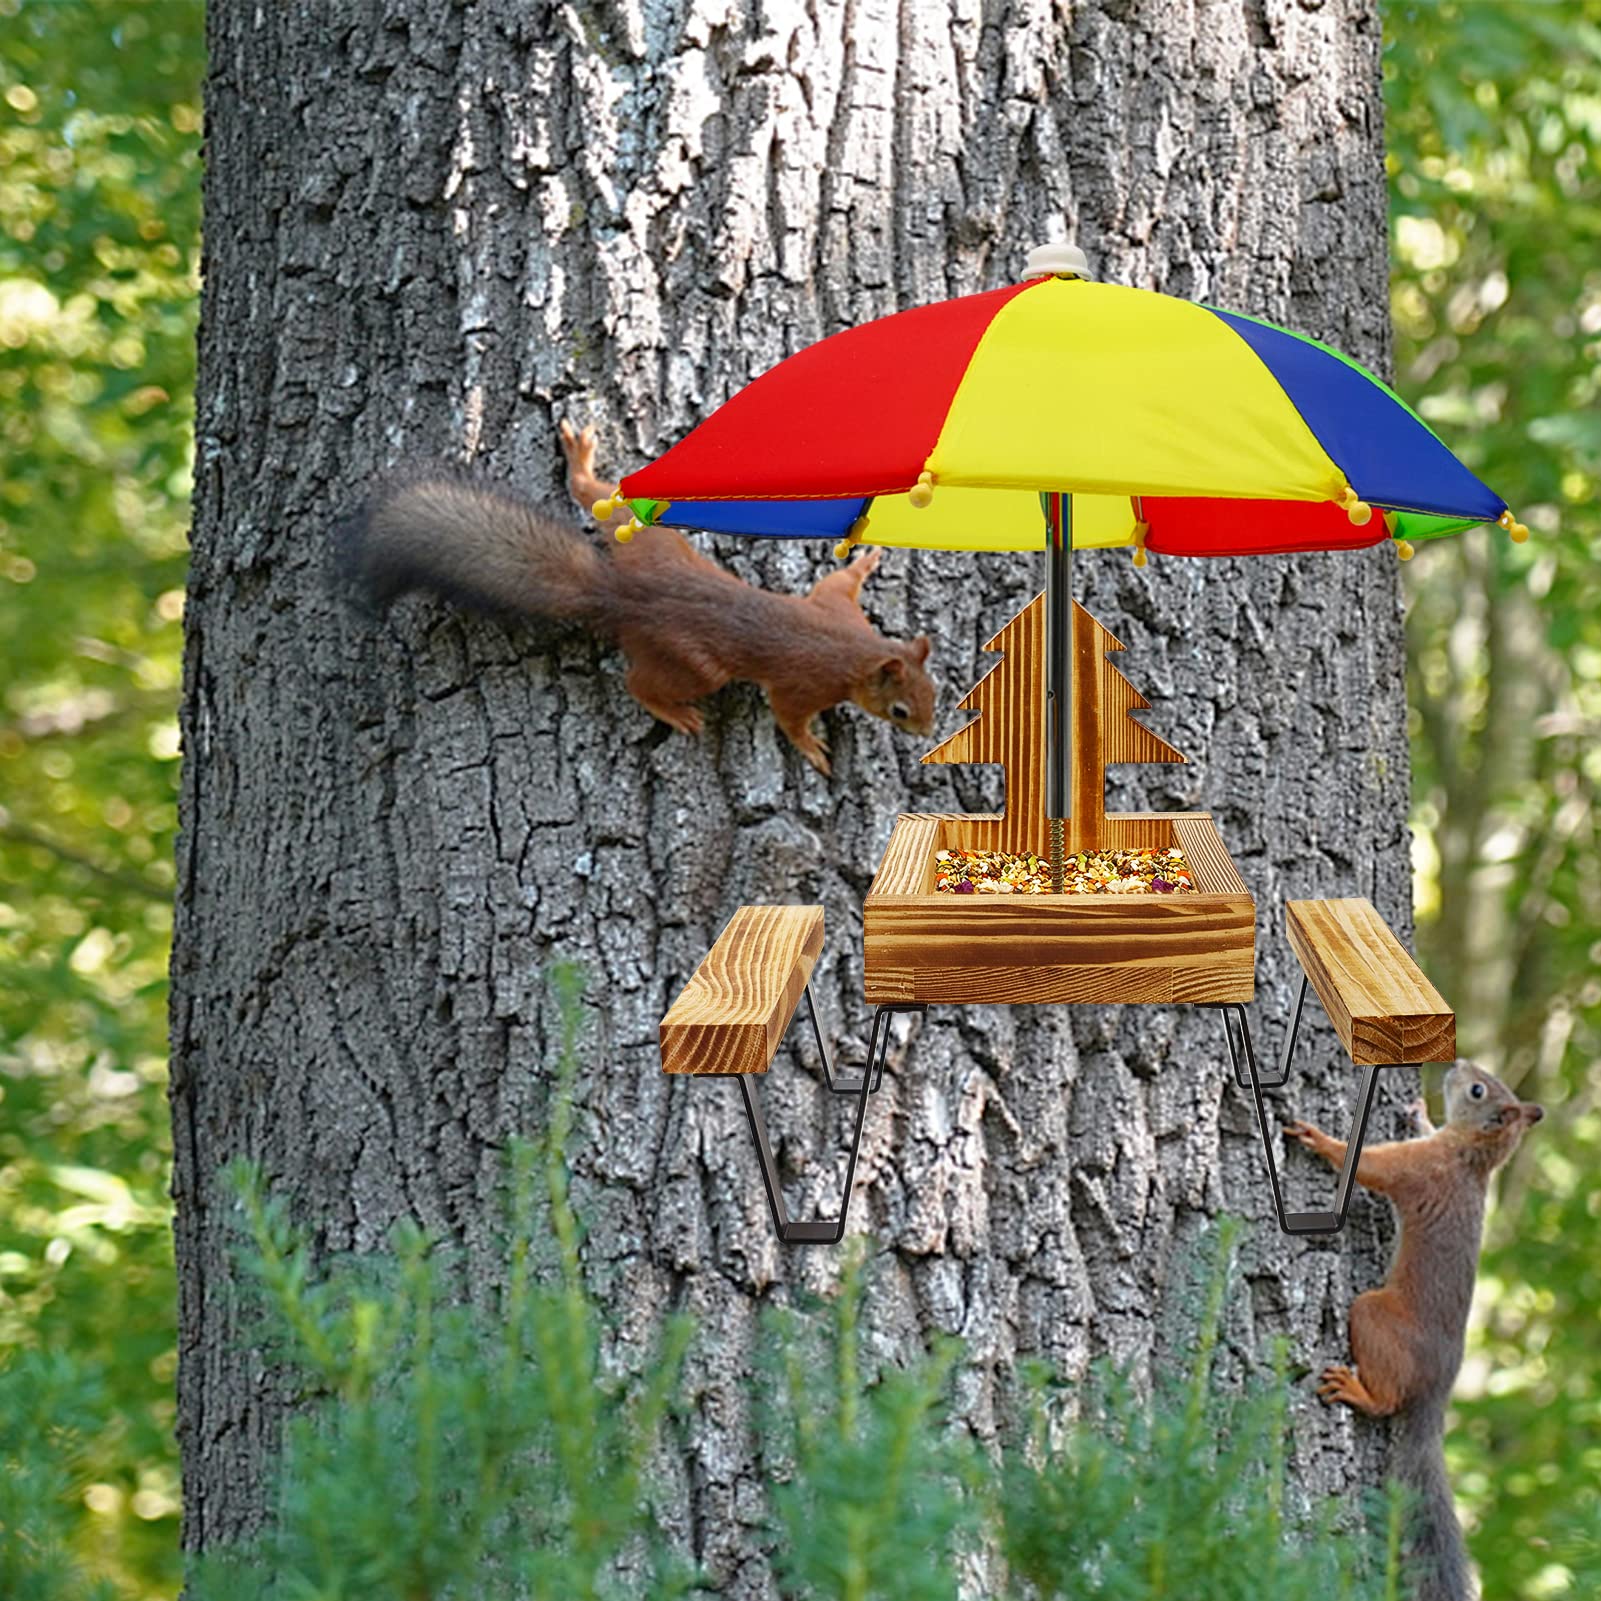 Squirrel Feeder, Squirrel Picnic Table Feeder for Outside with Umbrella Benches Carbonized Wood Bird Chipmunk Feeder Picnic Solid Structure Hanging Corn Cob Holder Snacks Peanuts Pet Gifts